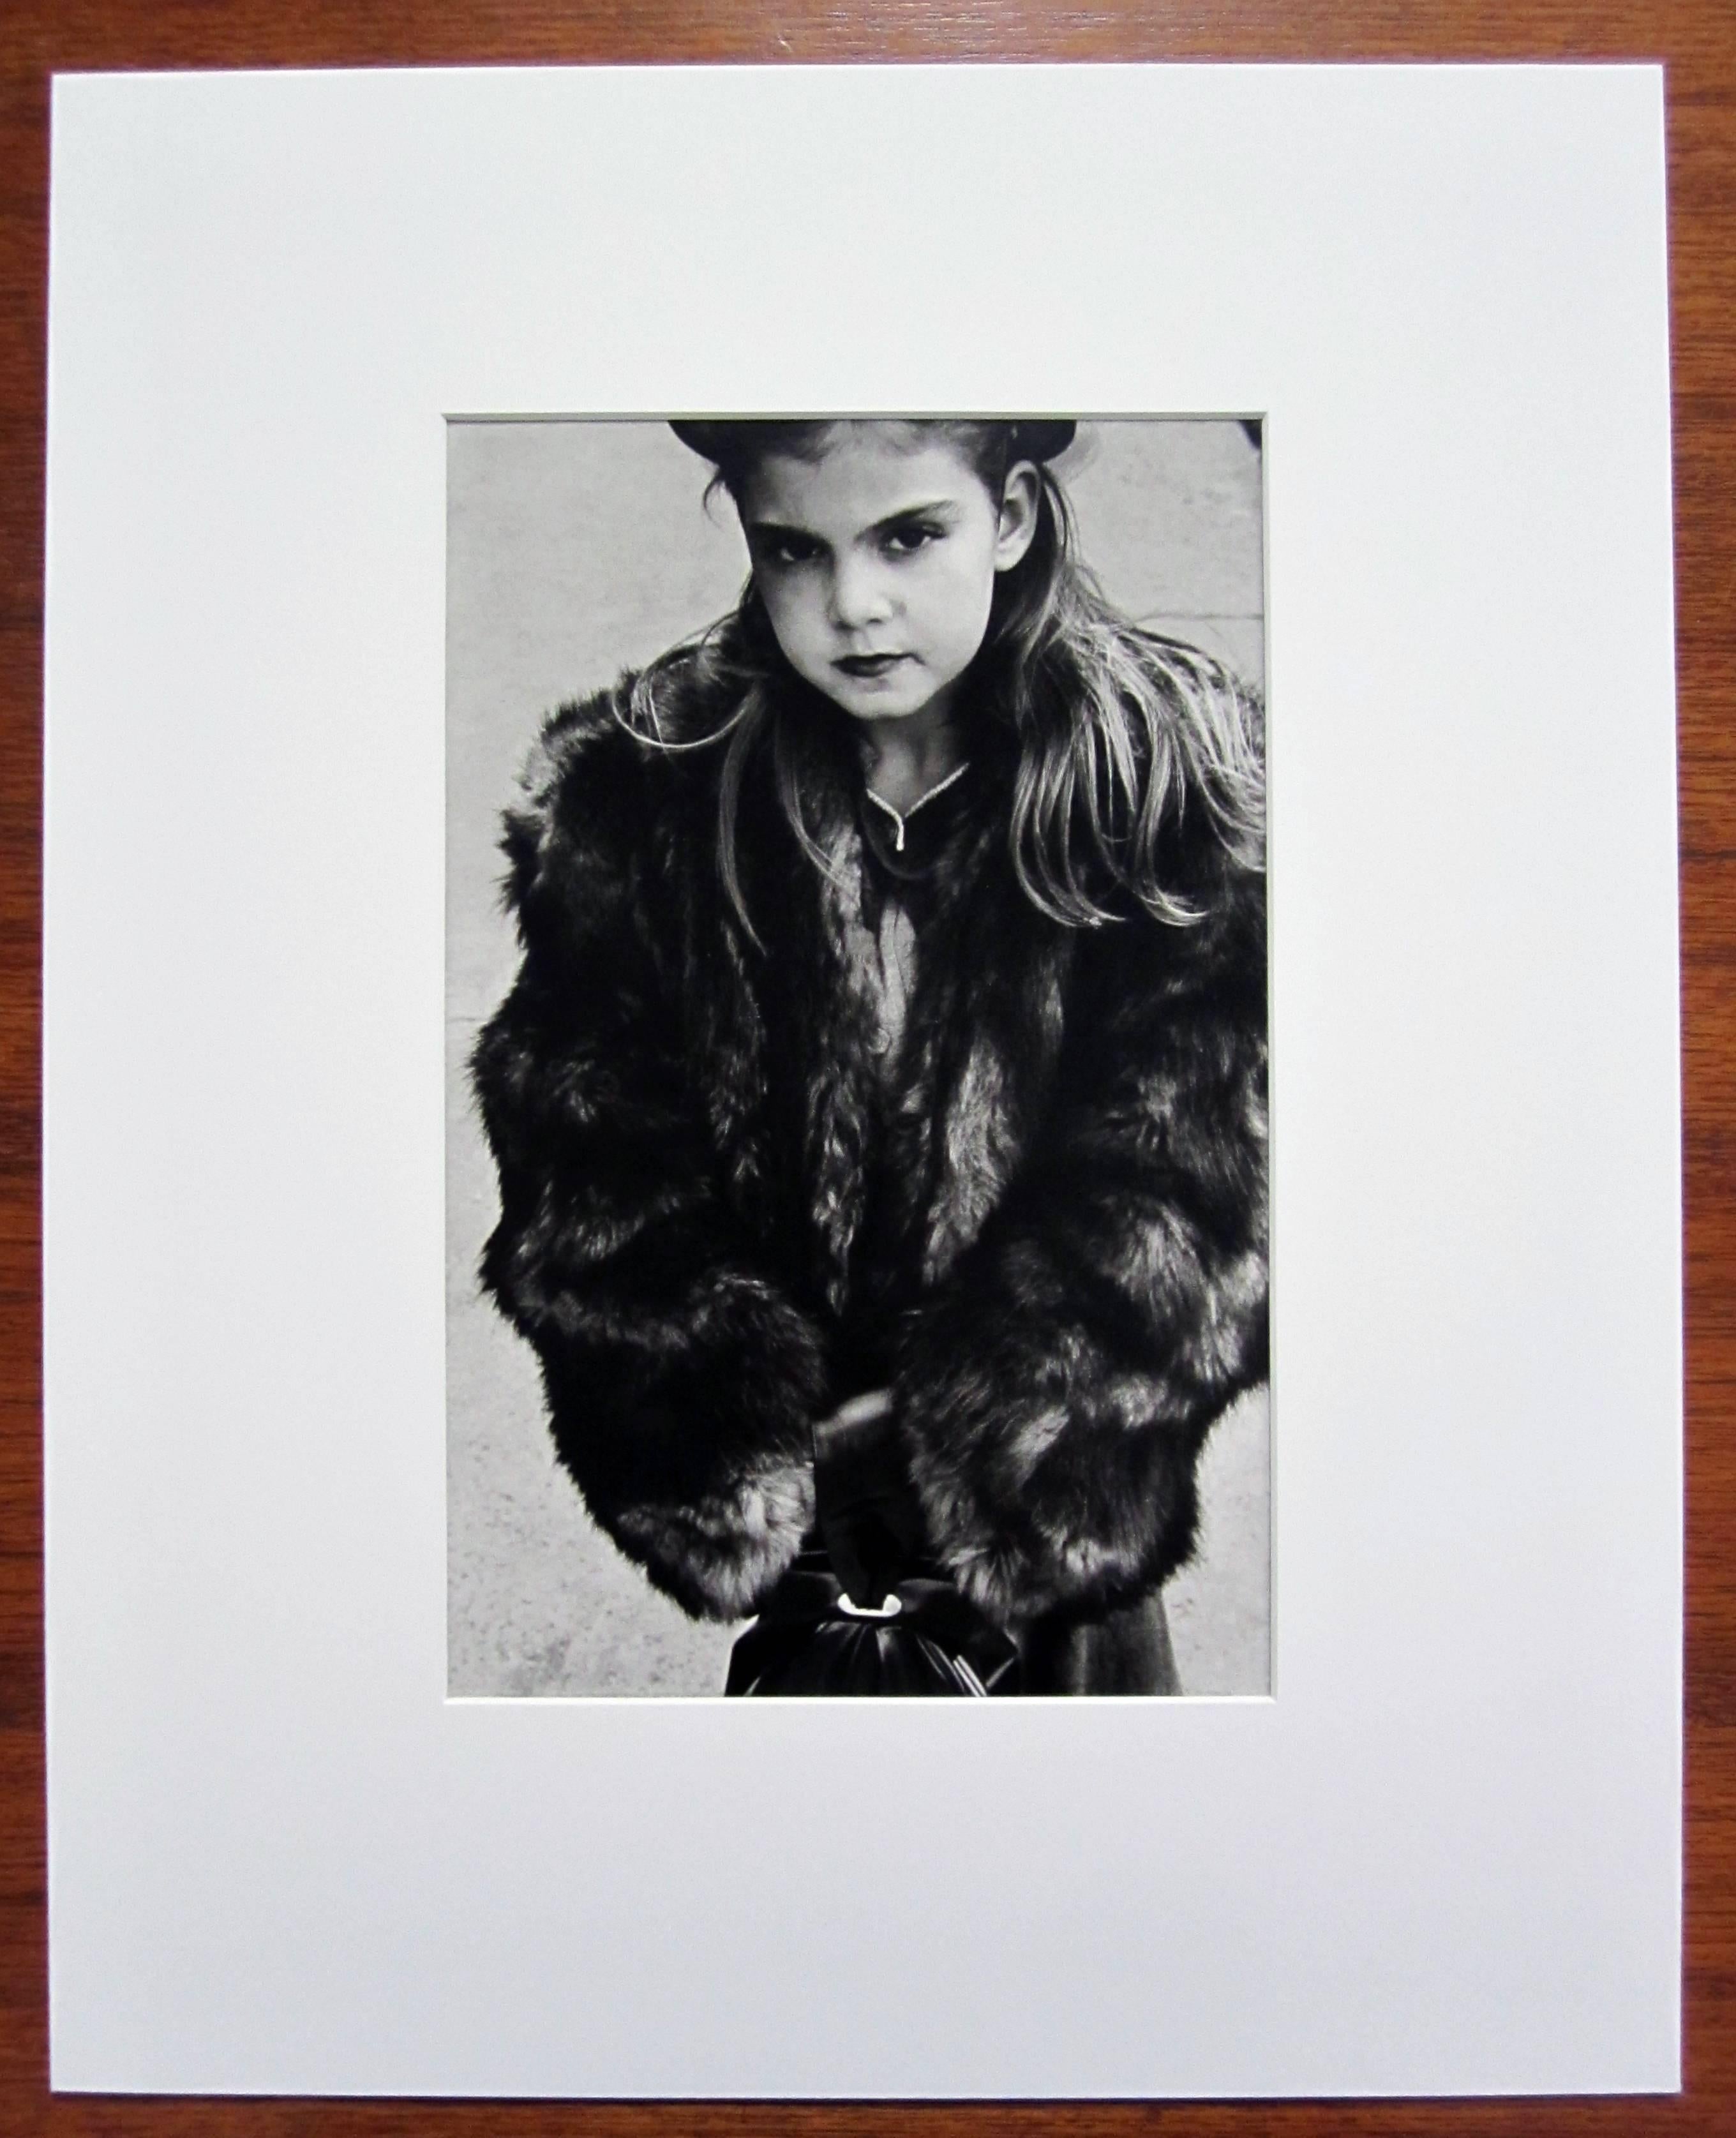 Young Girl Wearing Fur Coat, NYC - Photograph by Harold Feinstein